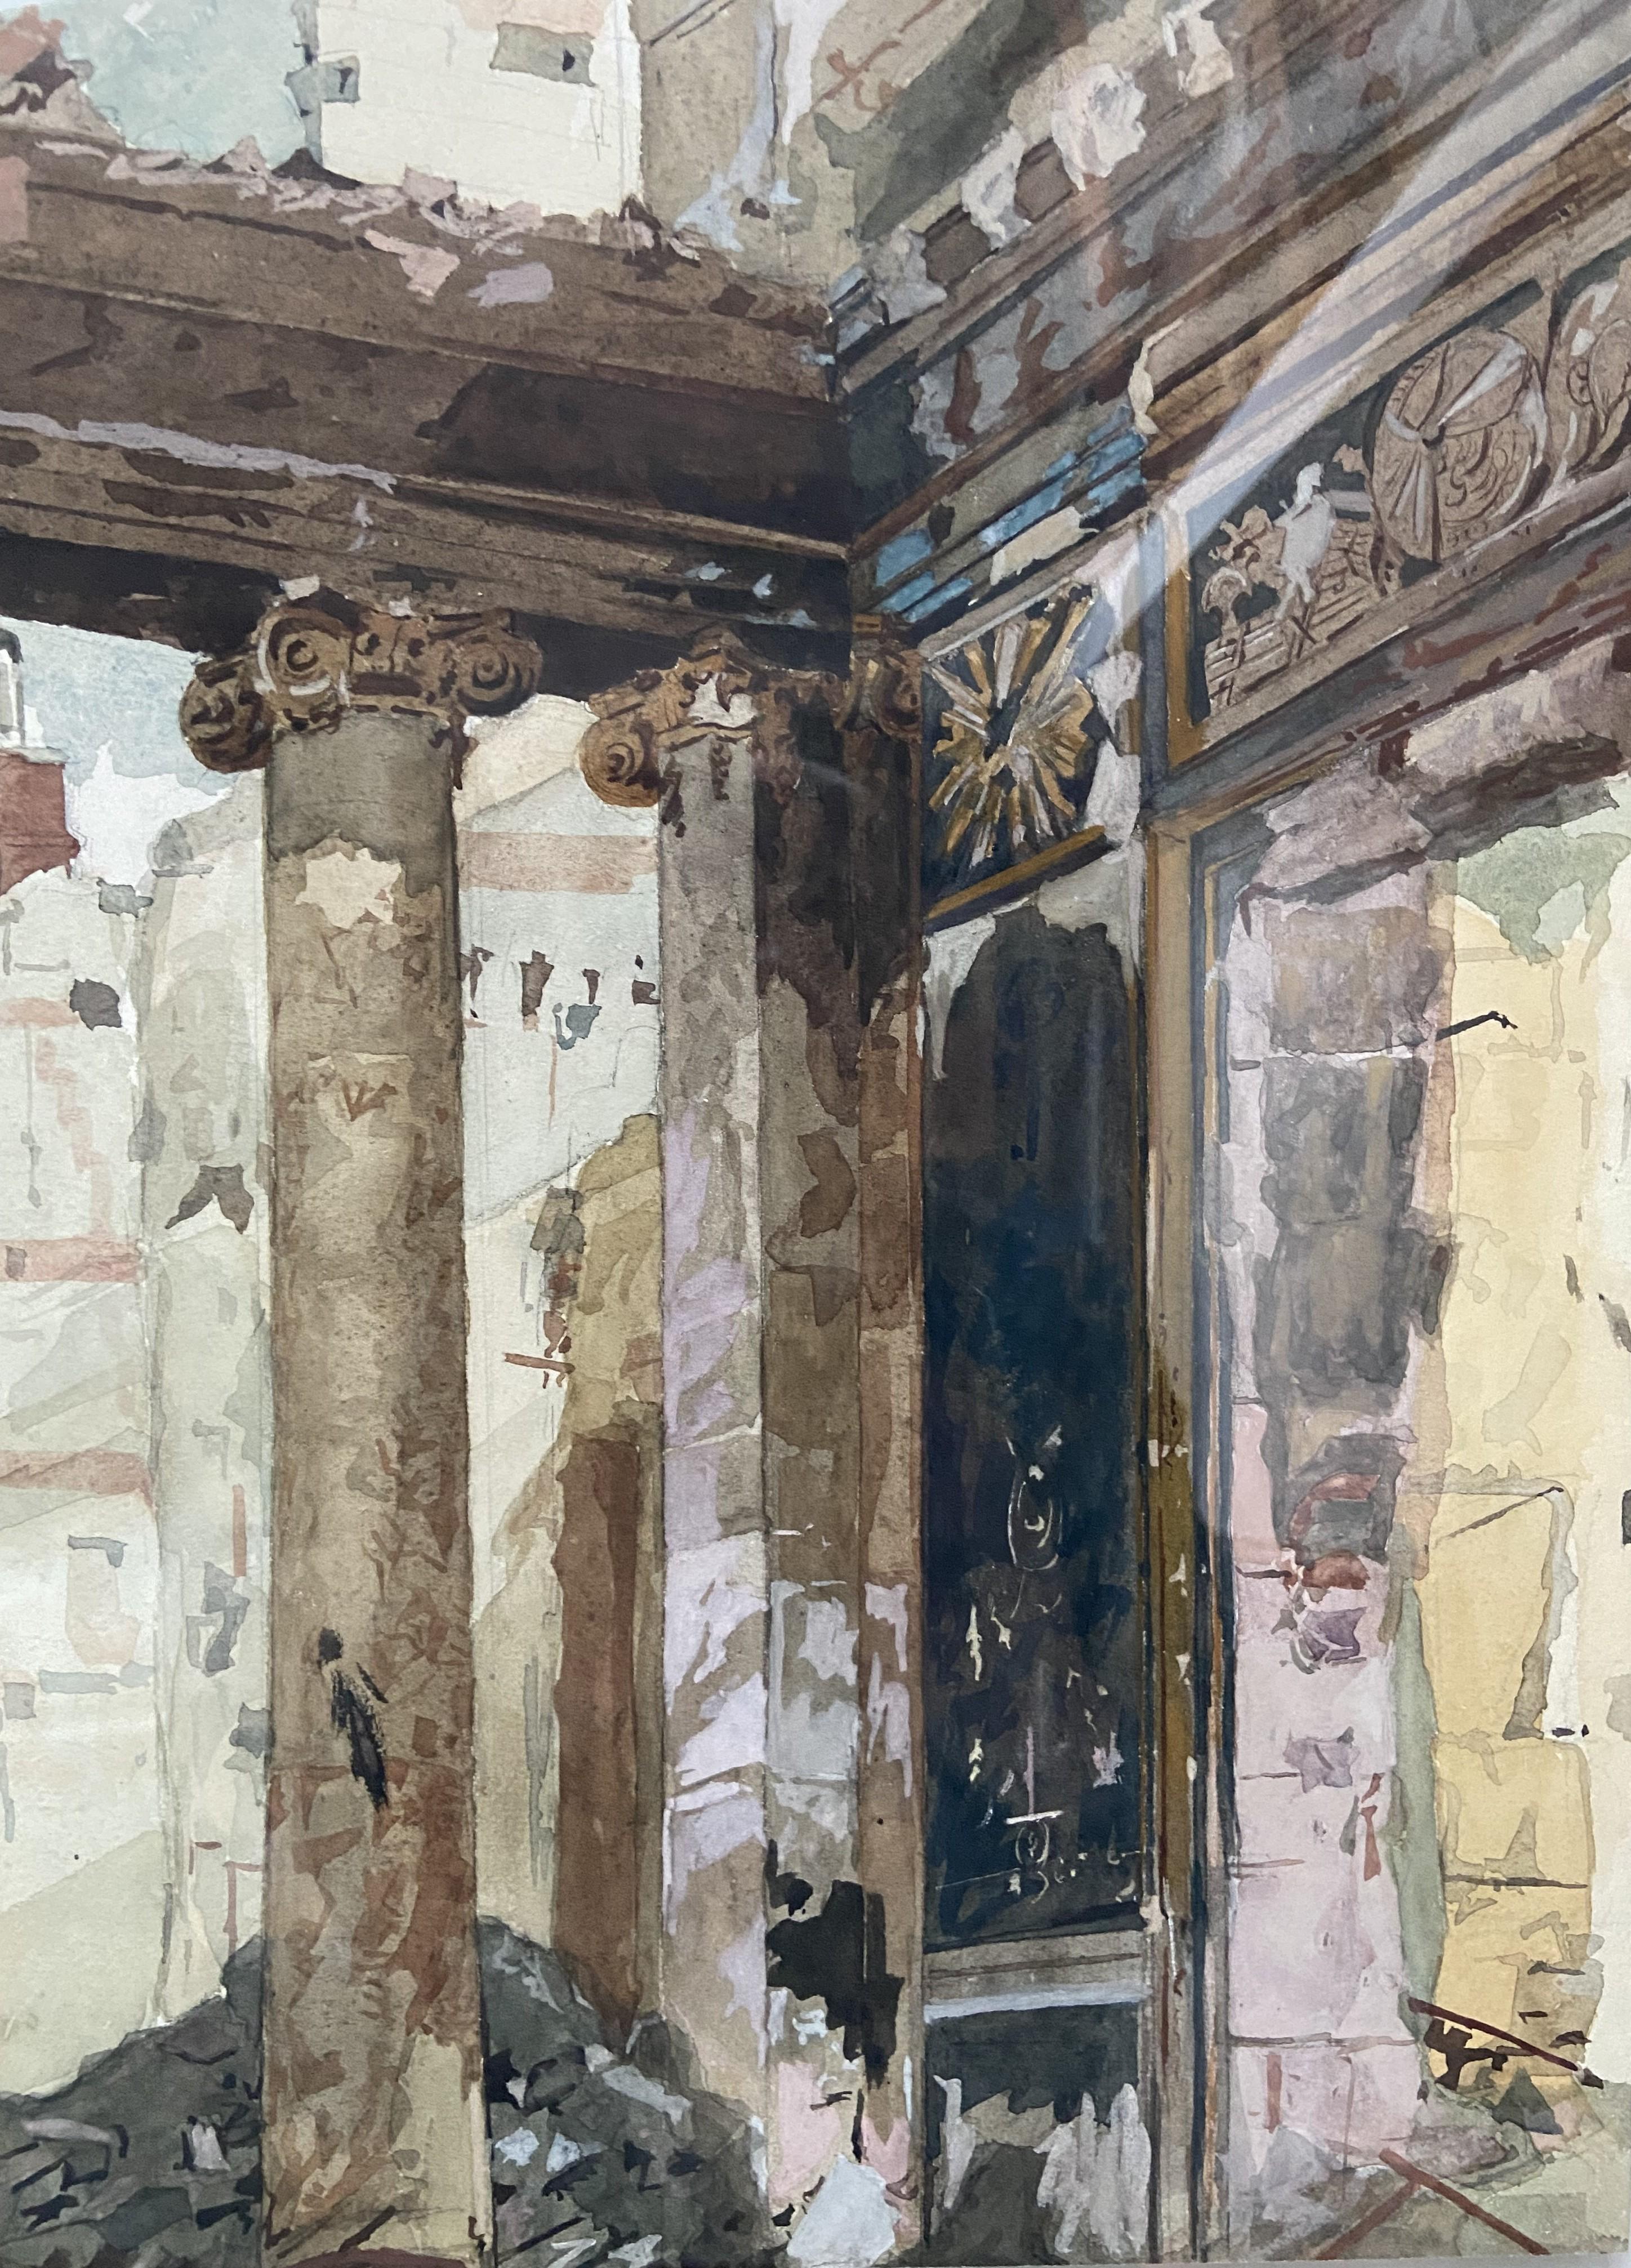 Unknown Interior Art - 20th century French school, Colonnade in ruins, watercolor